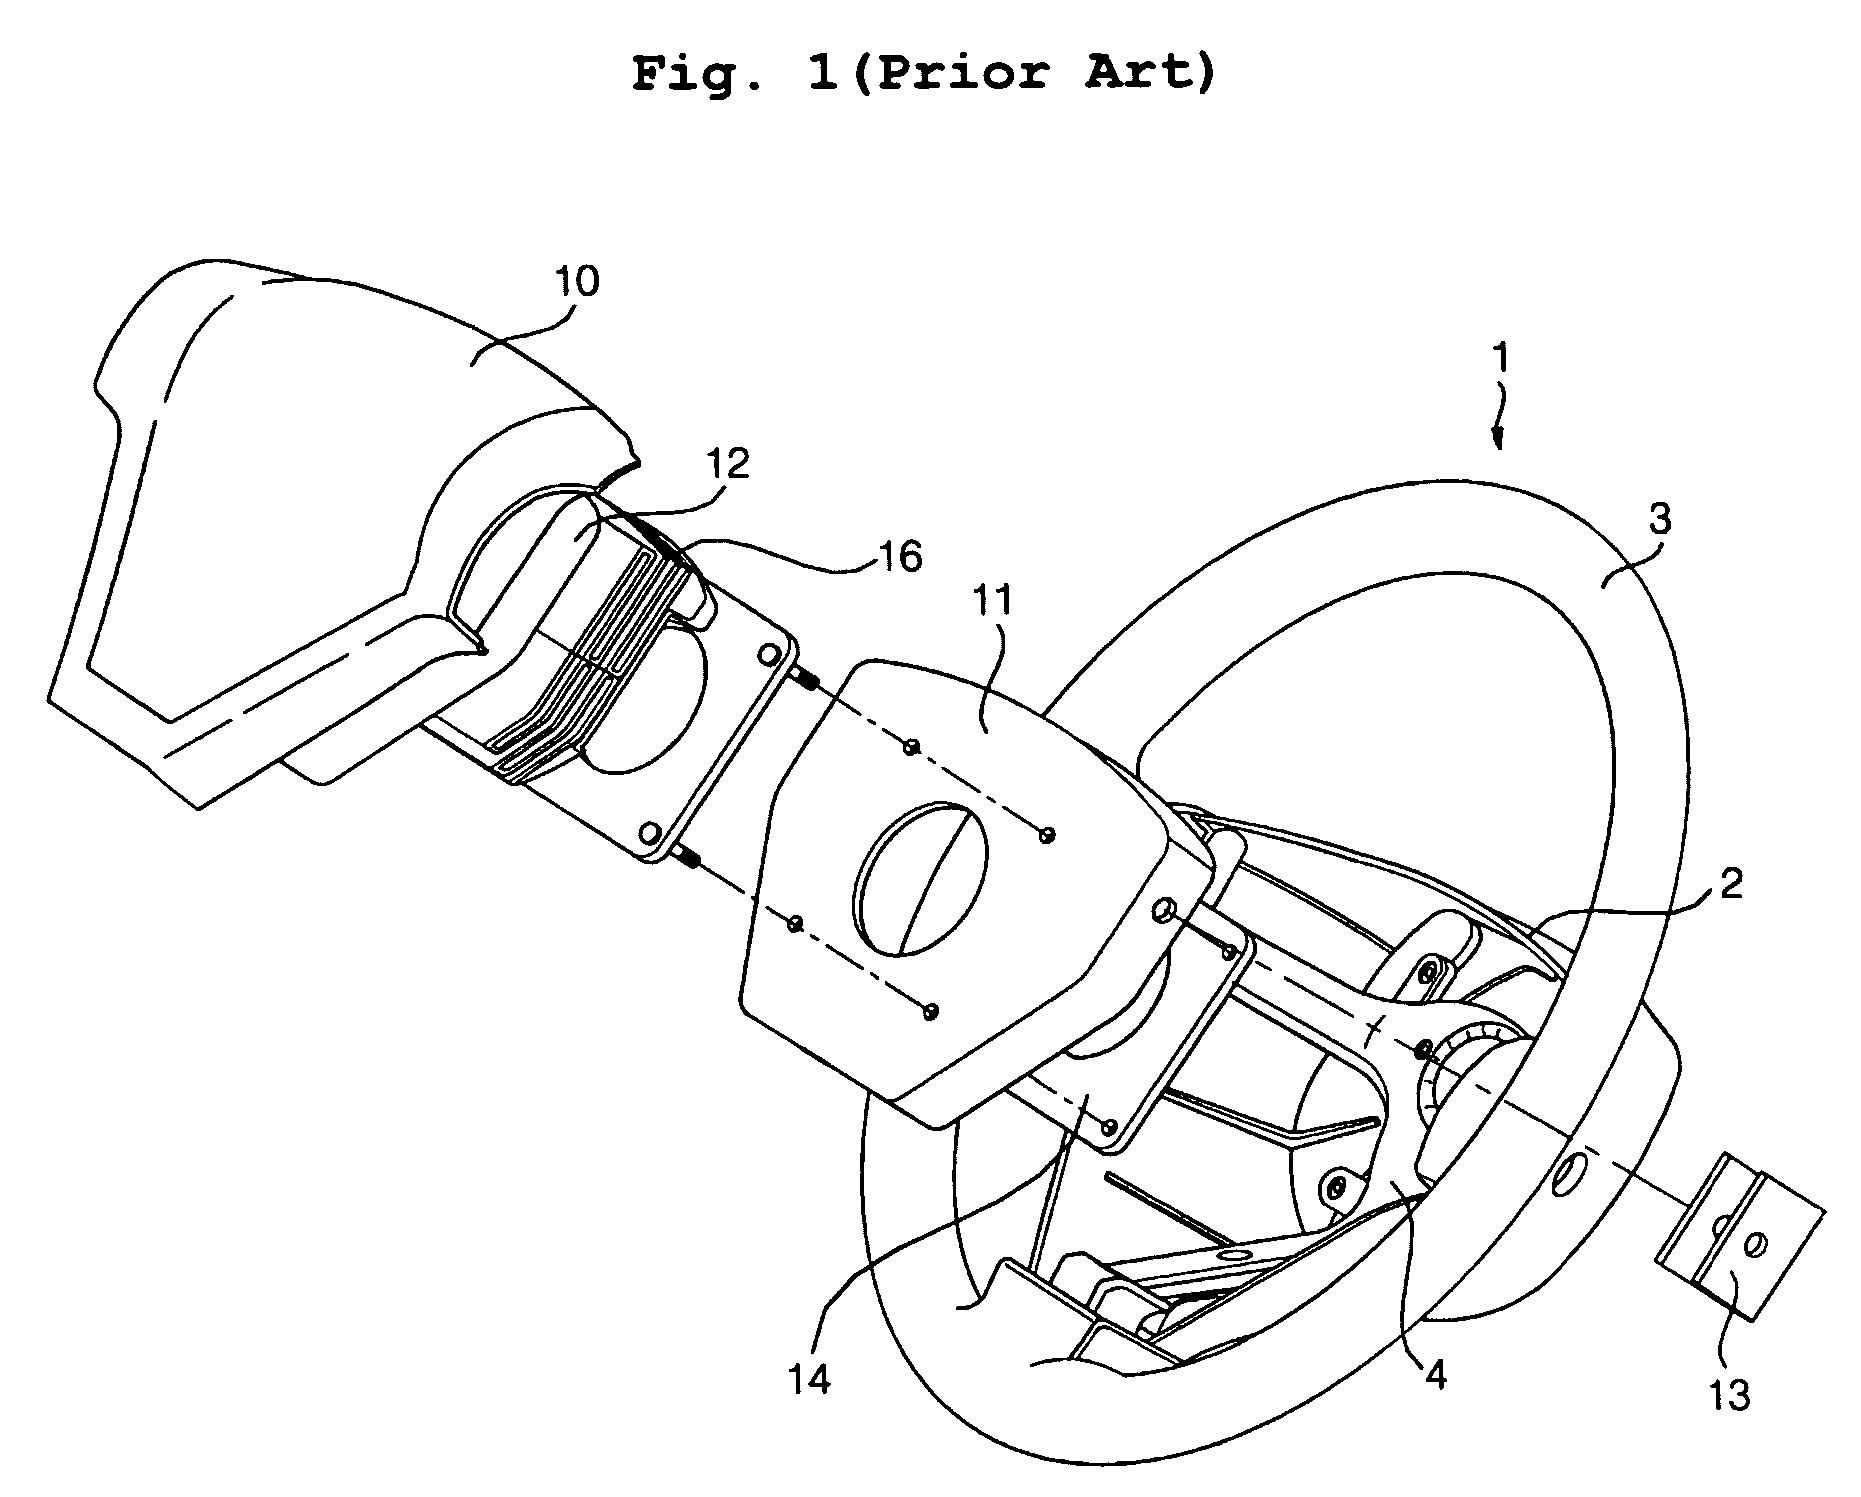 Assembly structure of airbag case